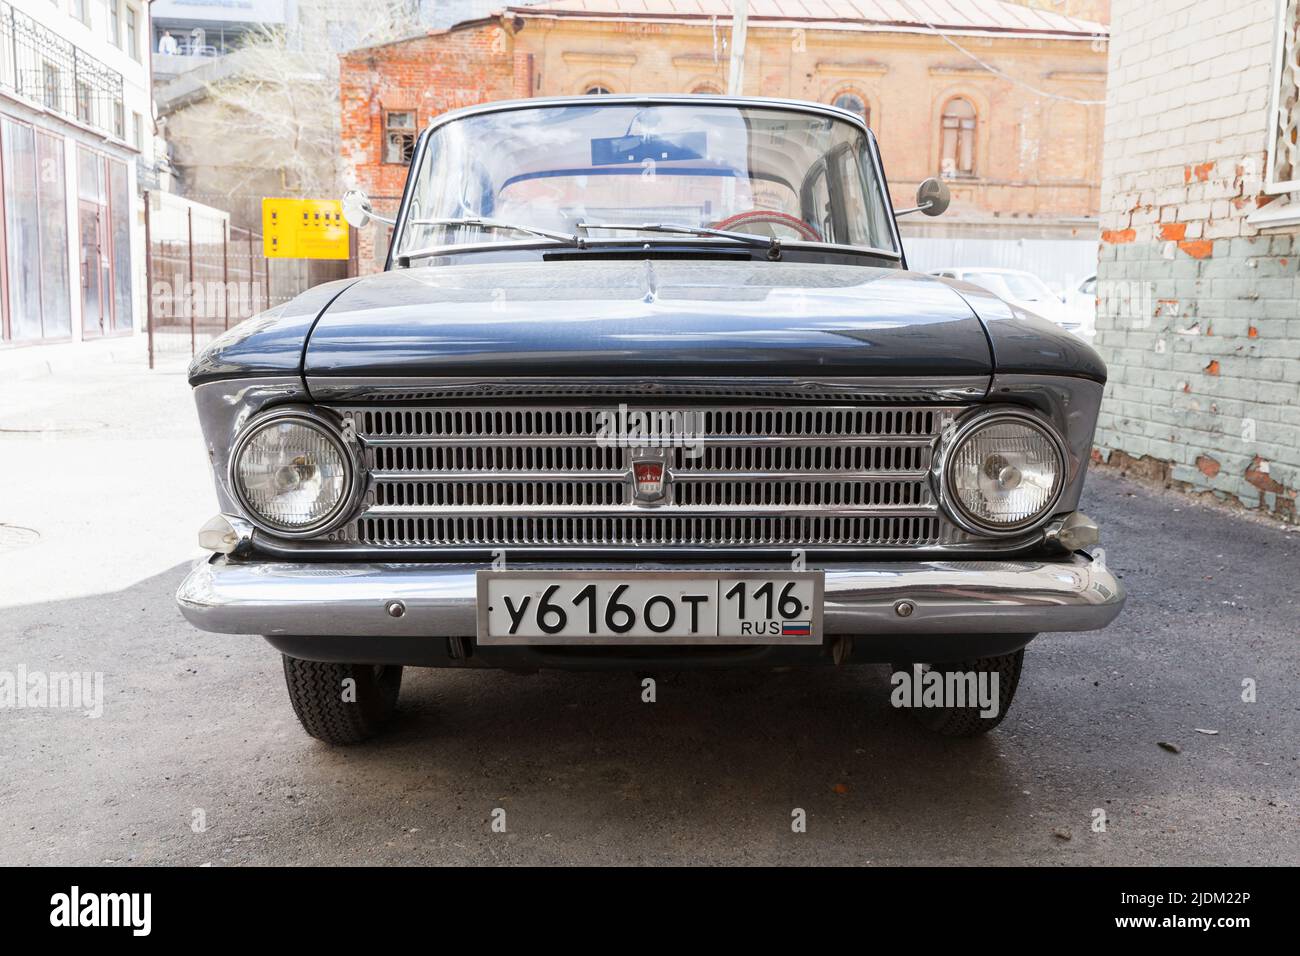 Kazan, Russia - May 6, 2022: Front view of Moskvitch 412 1968 release, close up outdoor photo Stock Photo